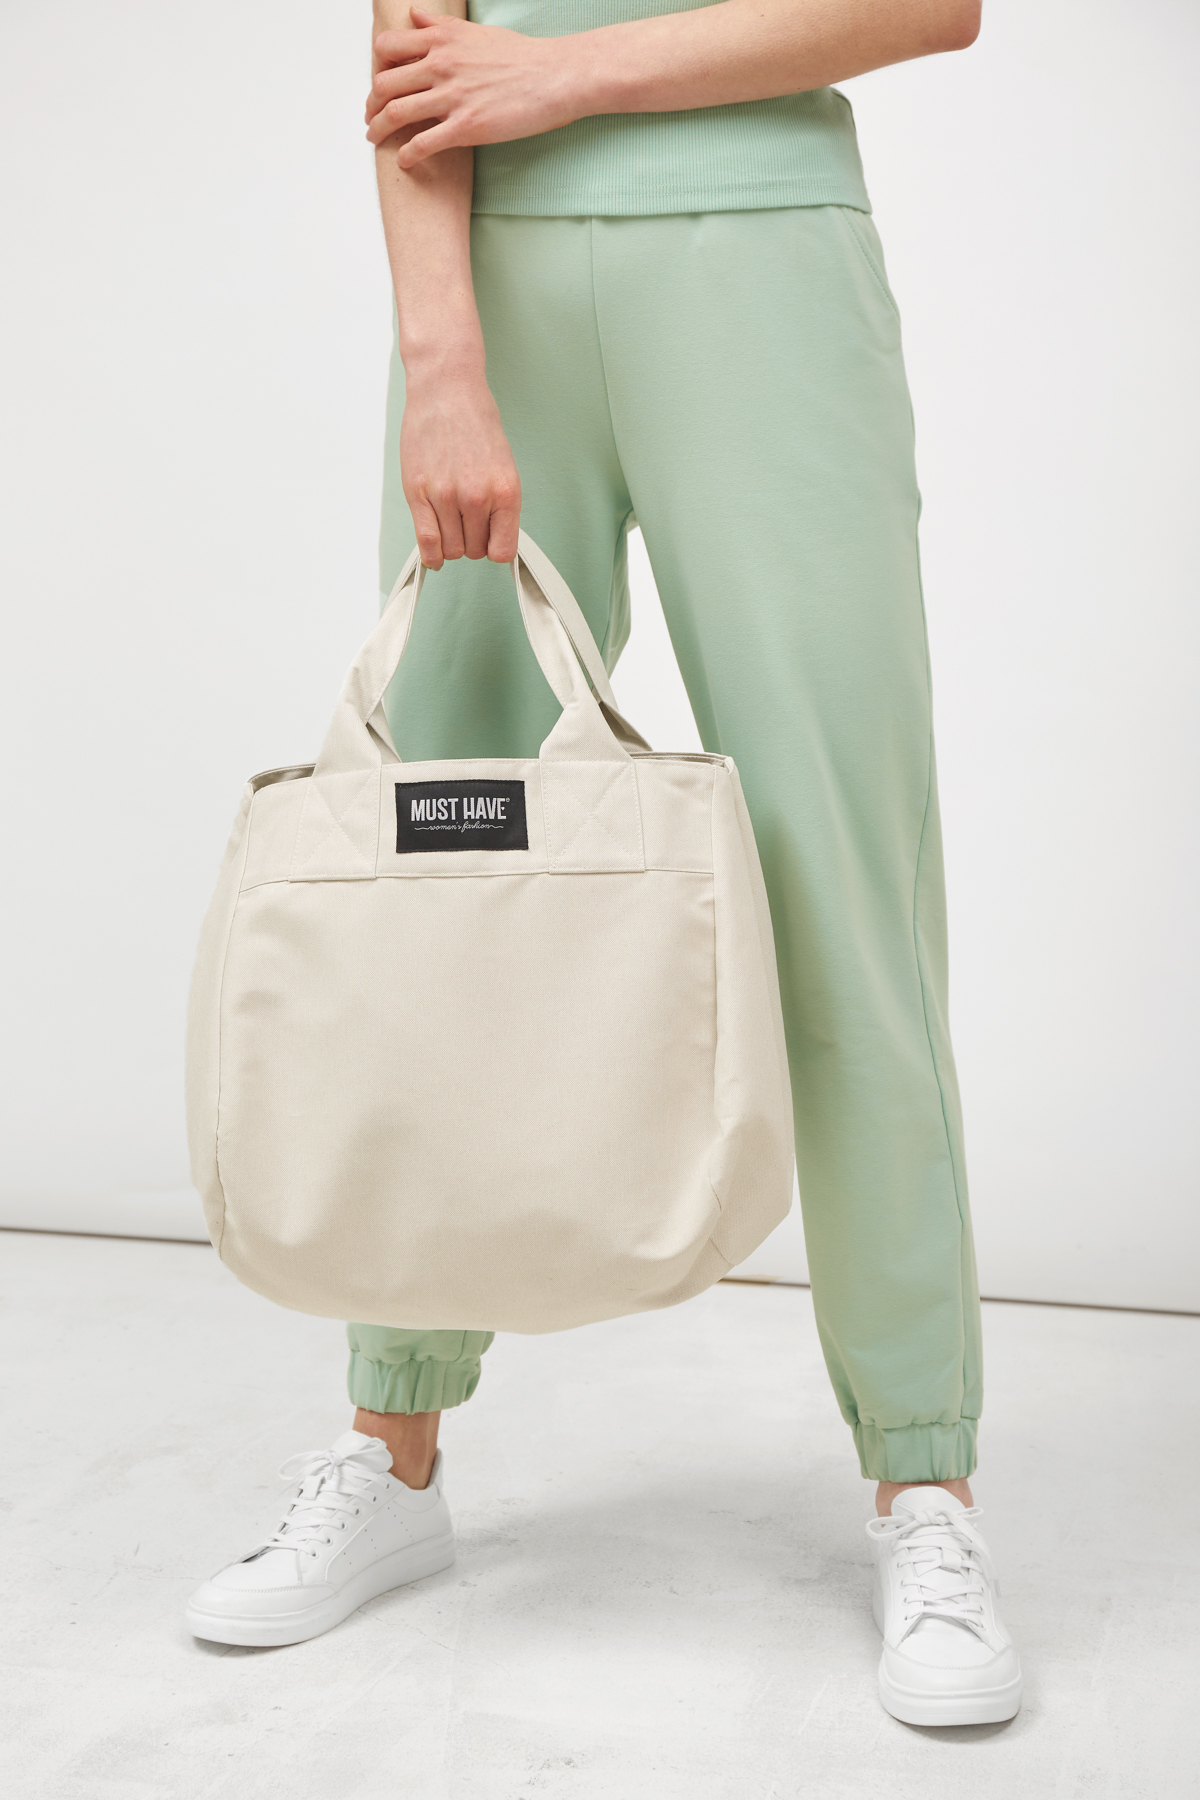 MustHave cotton bag, photo 4